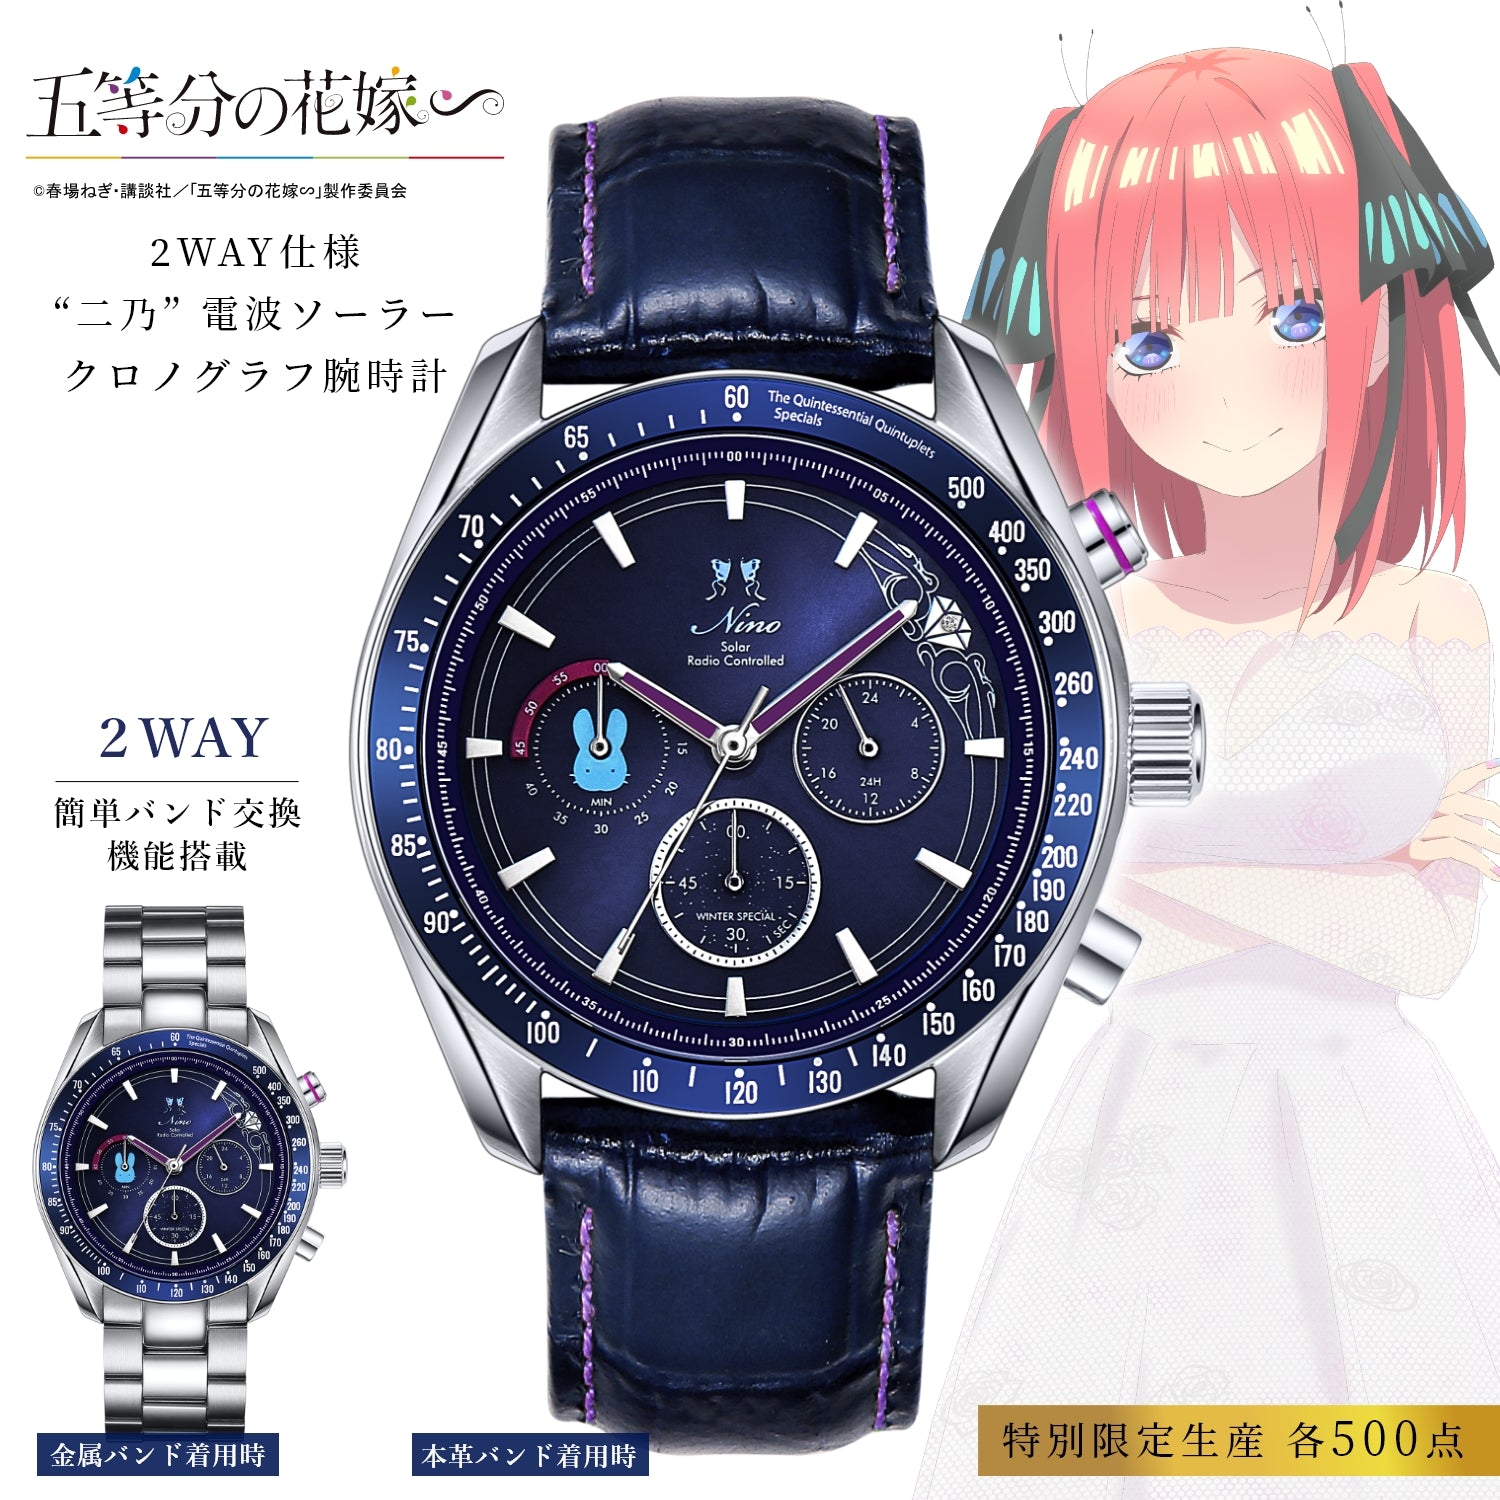 TV special anime“The Quintessential Quintuplets” Radio solar chronograph Winter special model change with belt| Nino Nakano